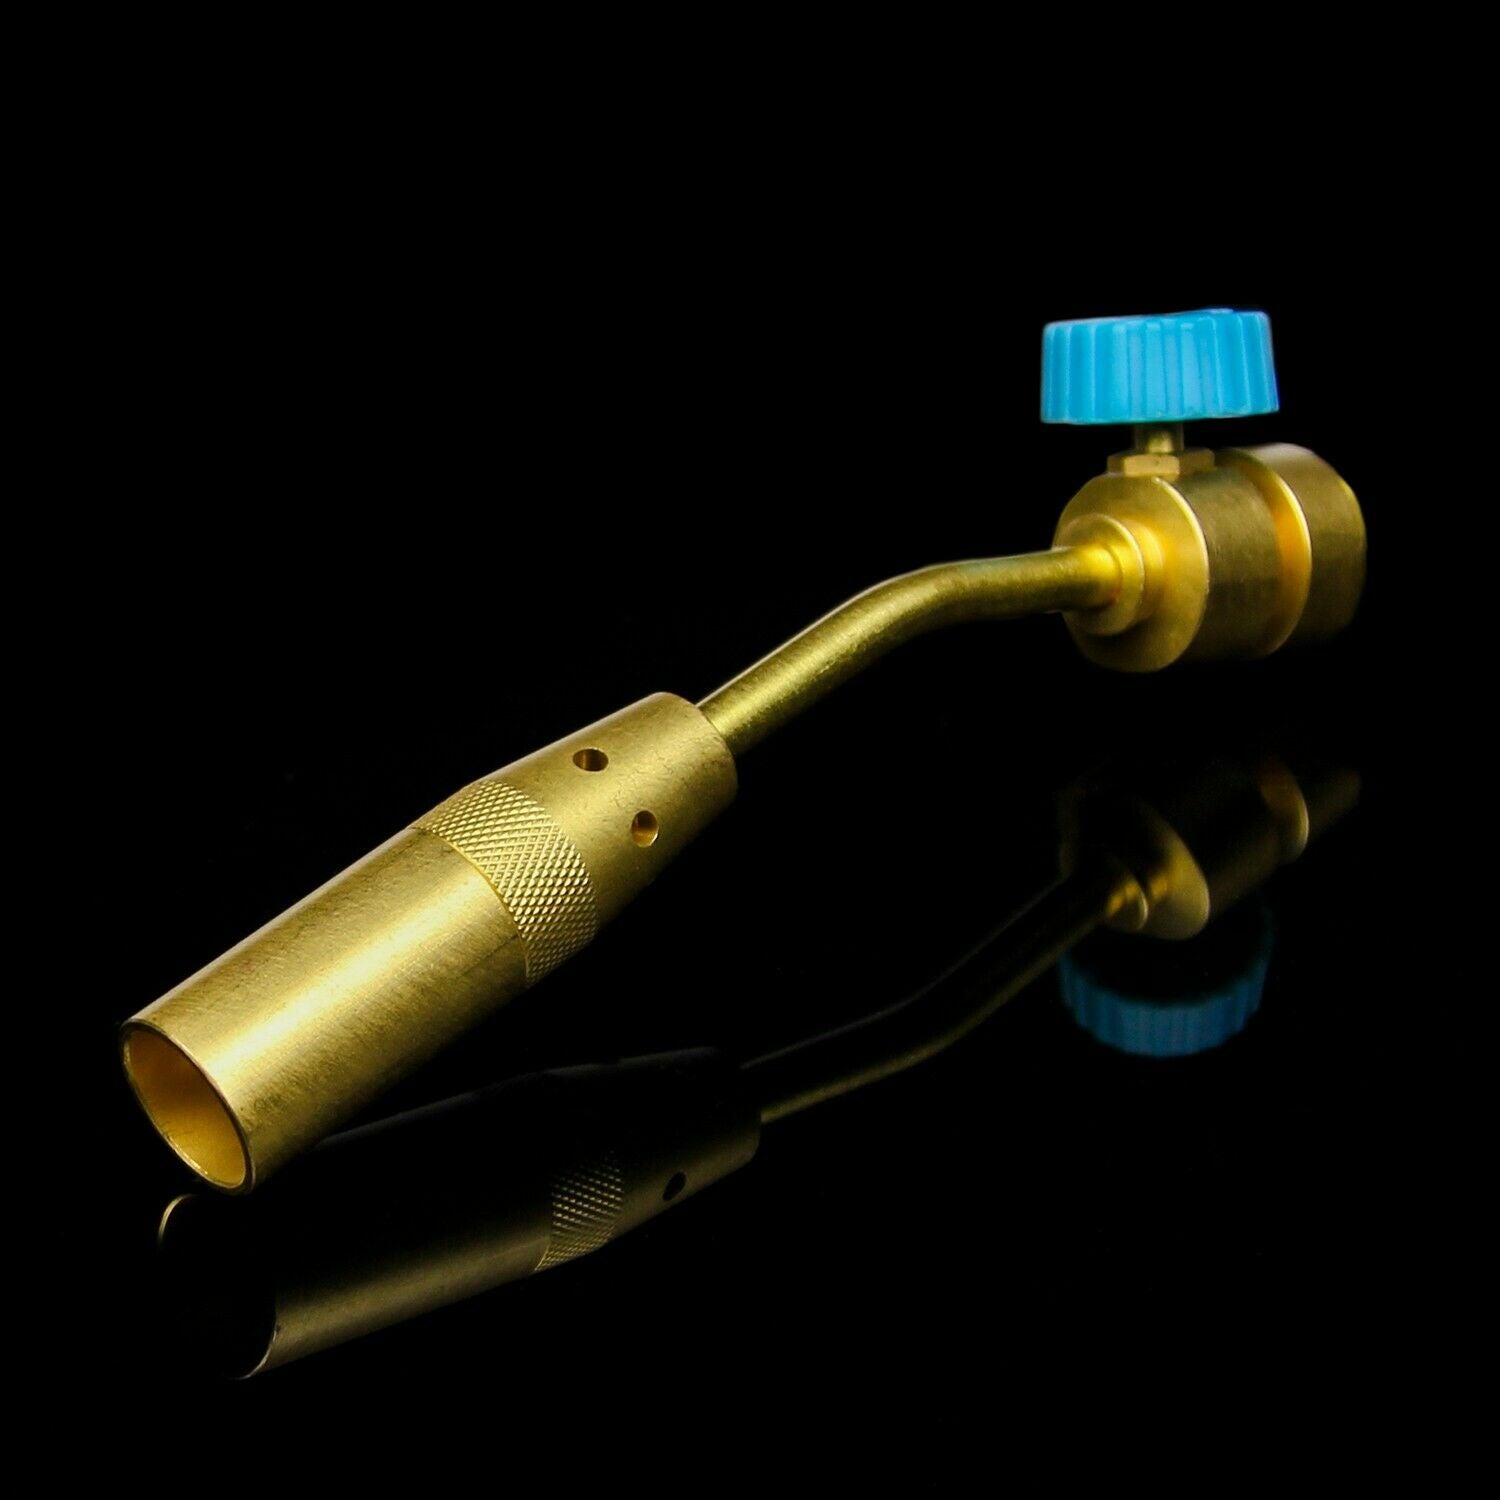 BlueFire Propane Torch Head,Super Jumbo Flame Propane Turbo Torch Head Capable to Surround Large Diameter Copper Pipes Up to 1.5 inch GAS Welding